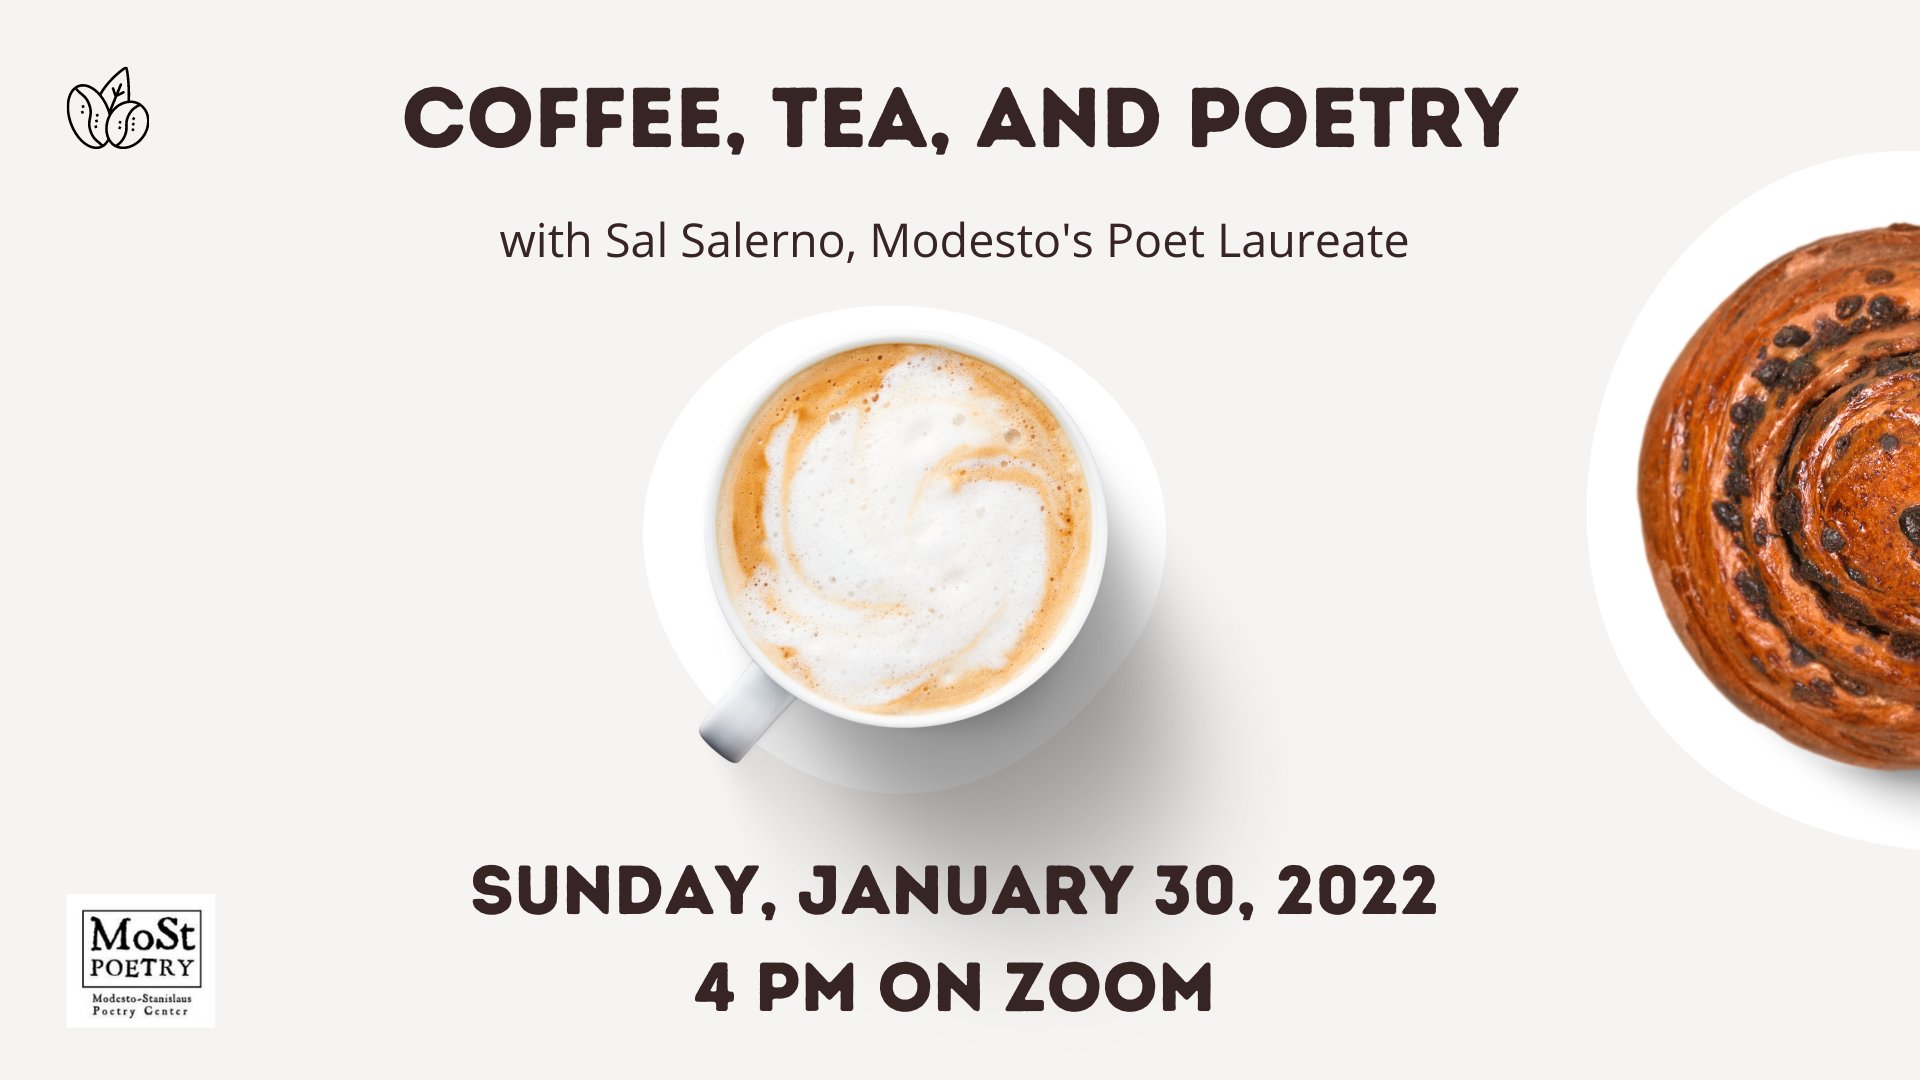 Coffee, Tea, and Poetry January 30 2022 at 4 pm on Zoom